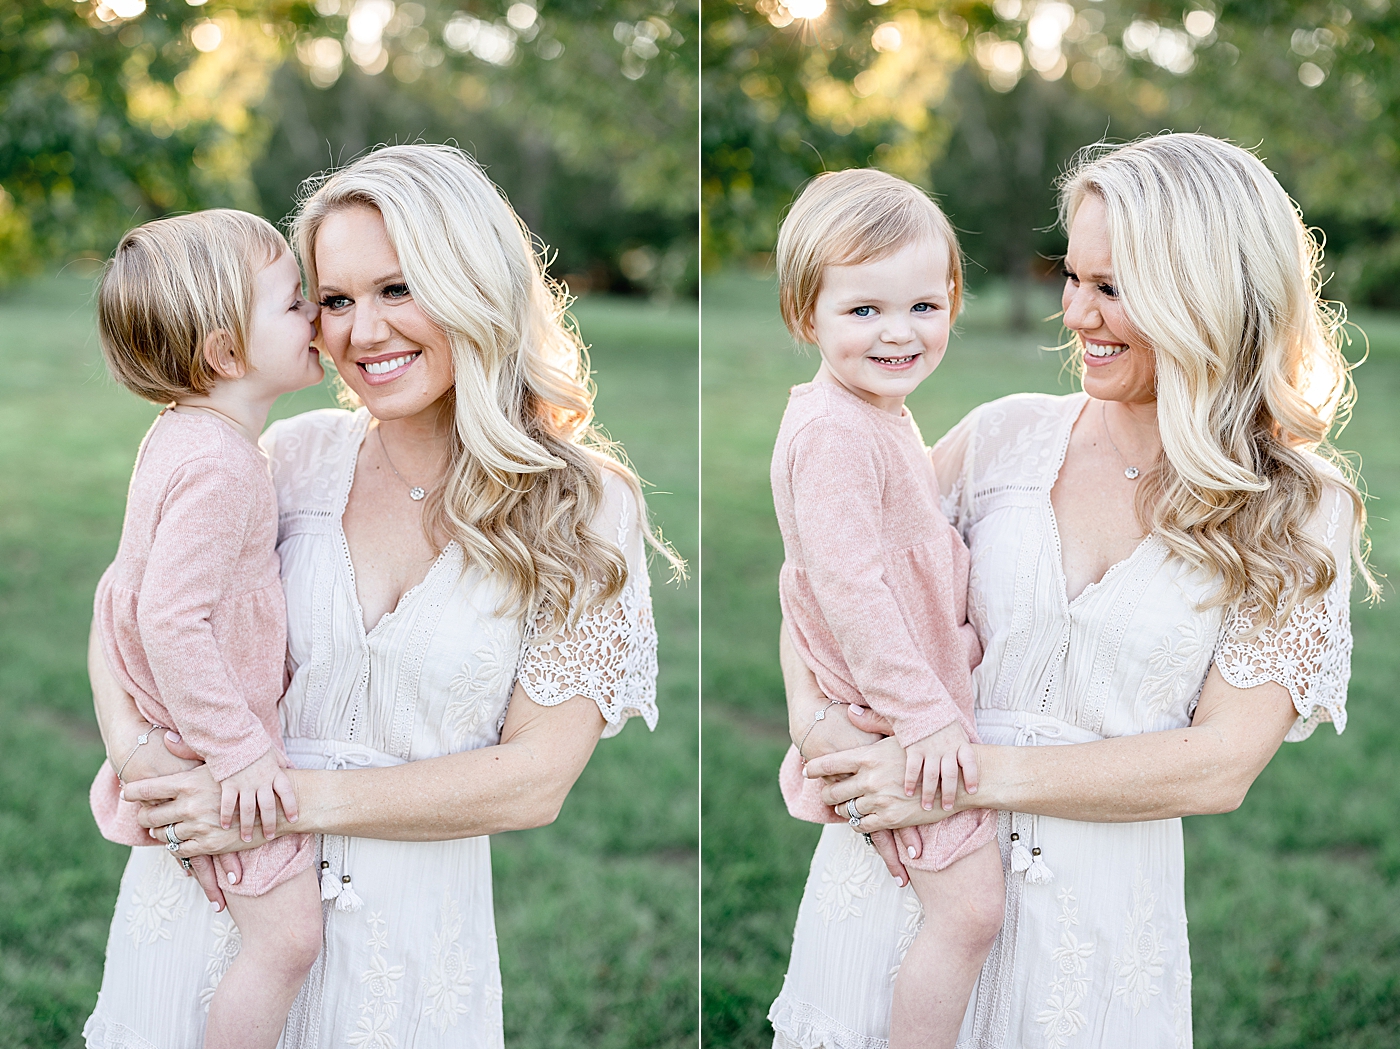 Mother-daughter photos by Brittany Elise Photography.